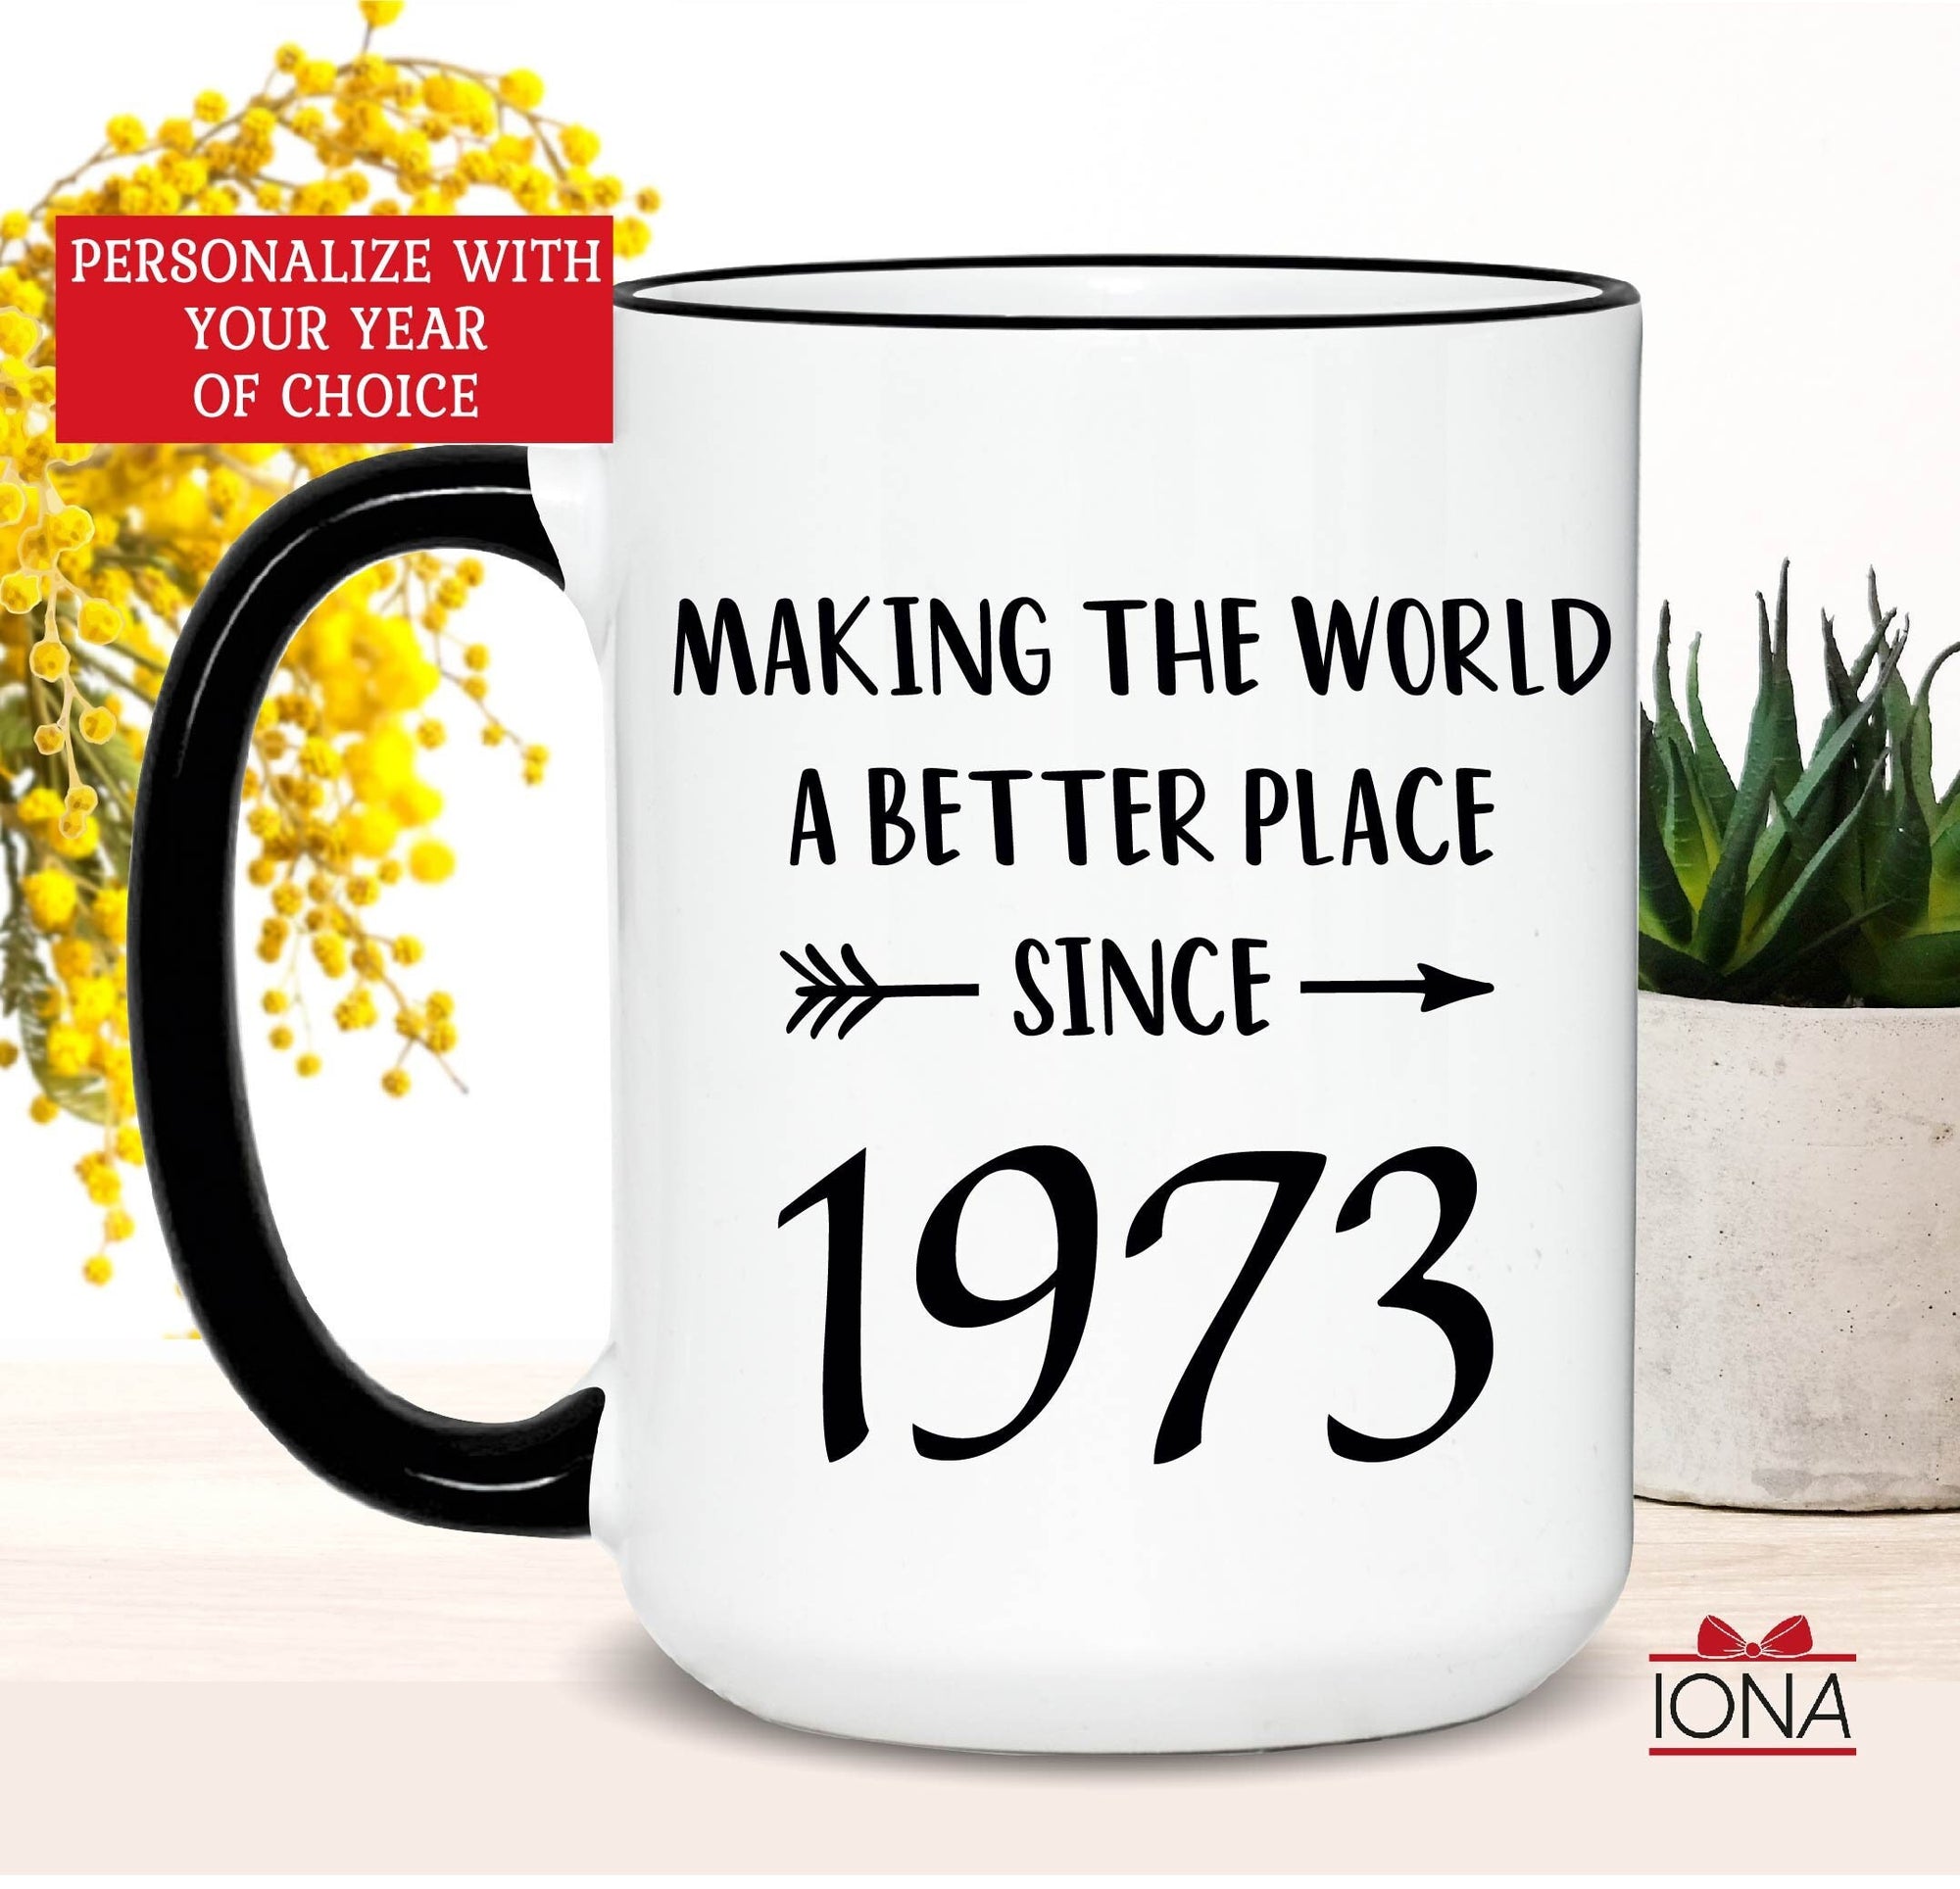 50th Birthday Gift, Personalized 50th Birthday Coffee Mug, Born in 1973, Making the world a better place since 1973, Best Friends 50th Gifts